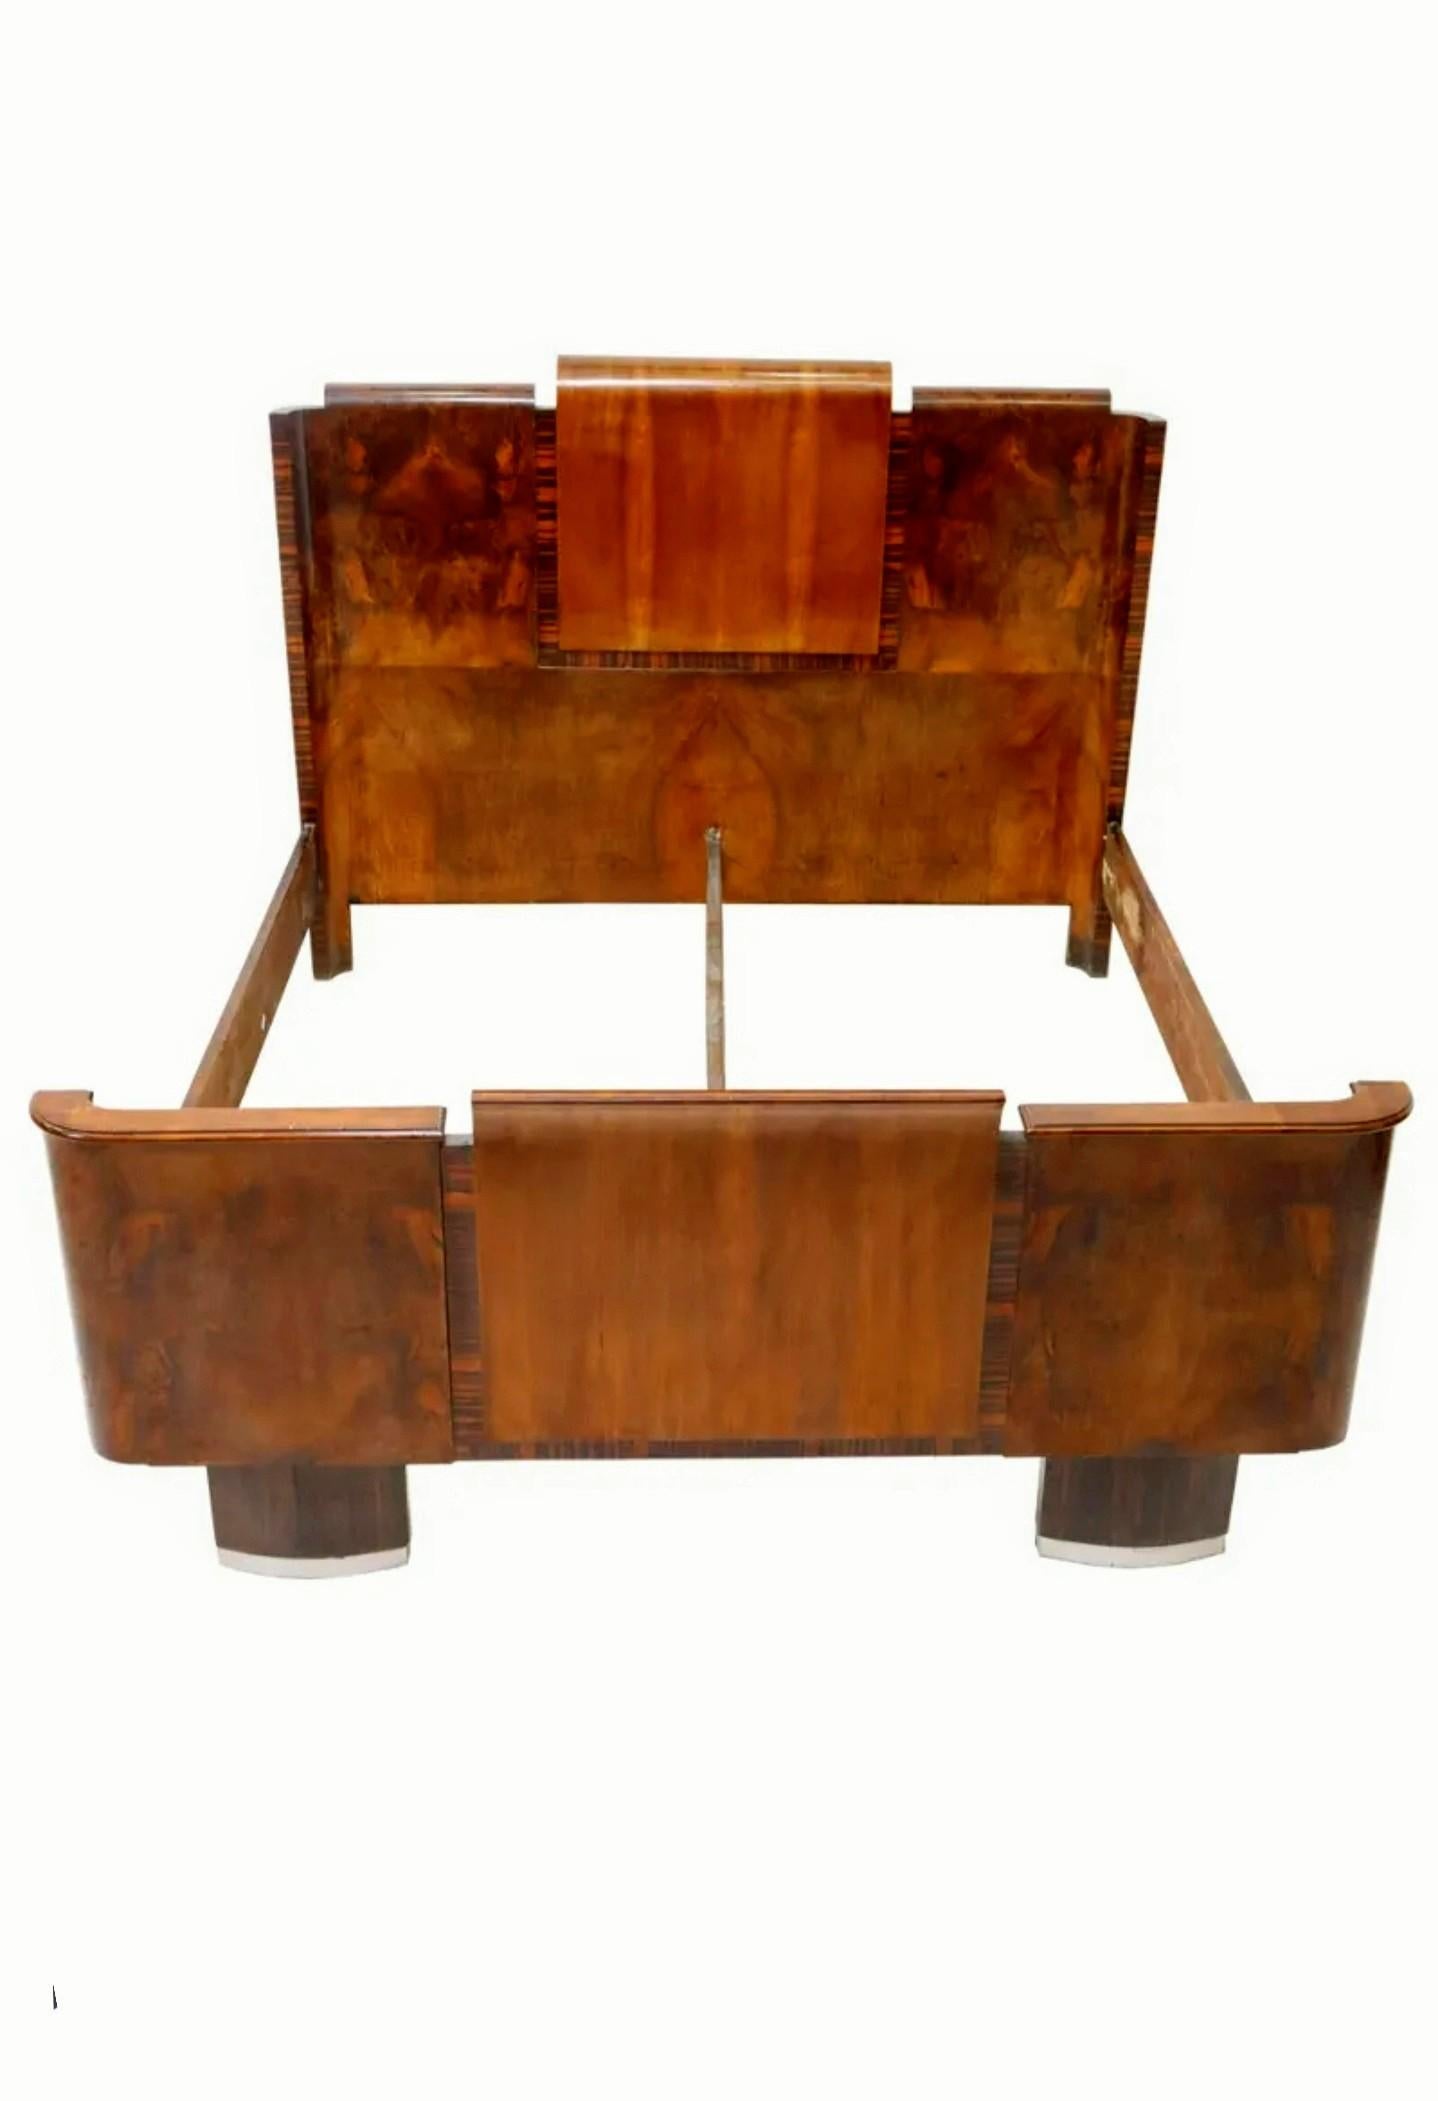 A luxurious Italian Art Deco period burled walnut & rosewood bed. circa 1930s 

Exquisitely hand-crafted in Italy, most likely the Venetian region of Northeastern Italy, early/mid-20th century, having a shaped headboard and footboard in rich